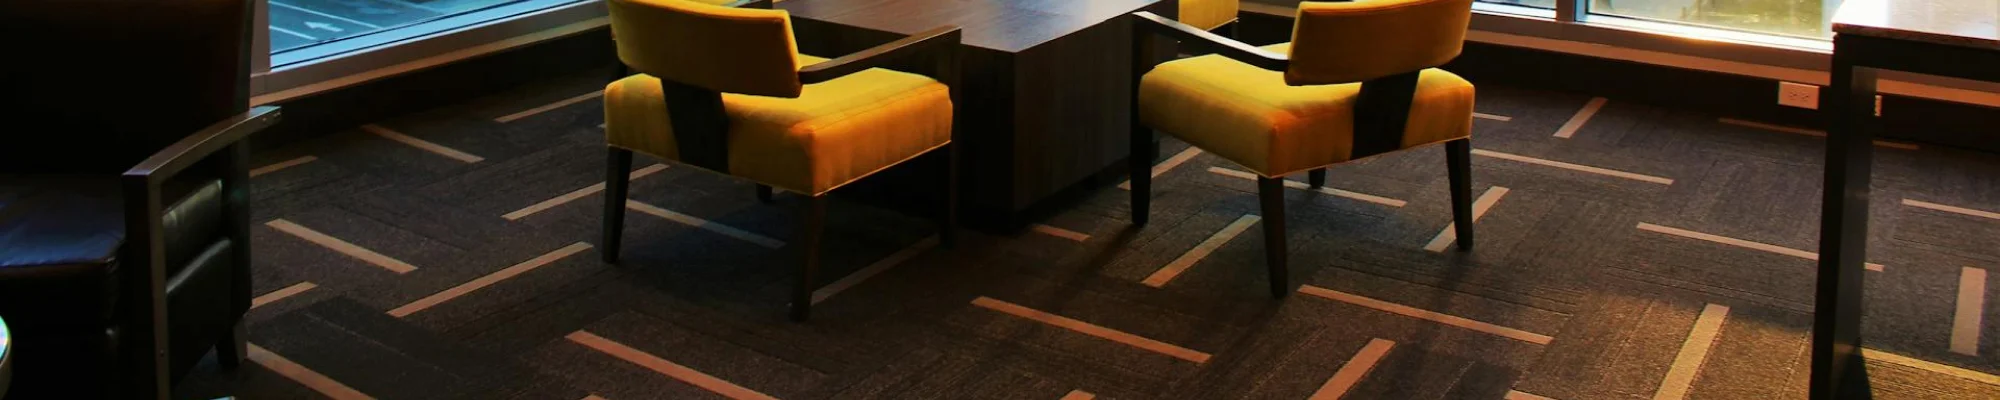 Extensive selection of  commercial flooring products at Expressive Flooring in Peachtree City, GA